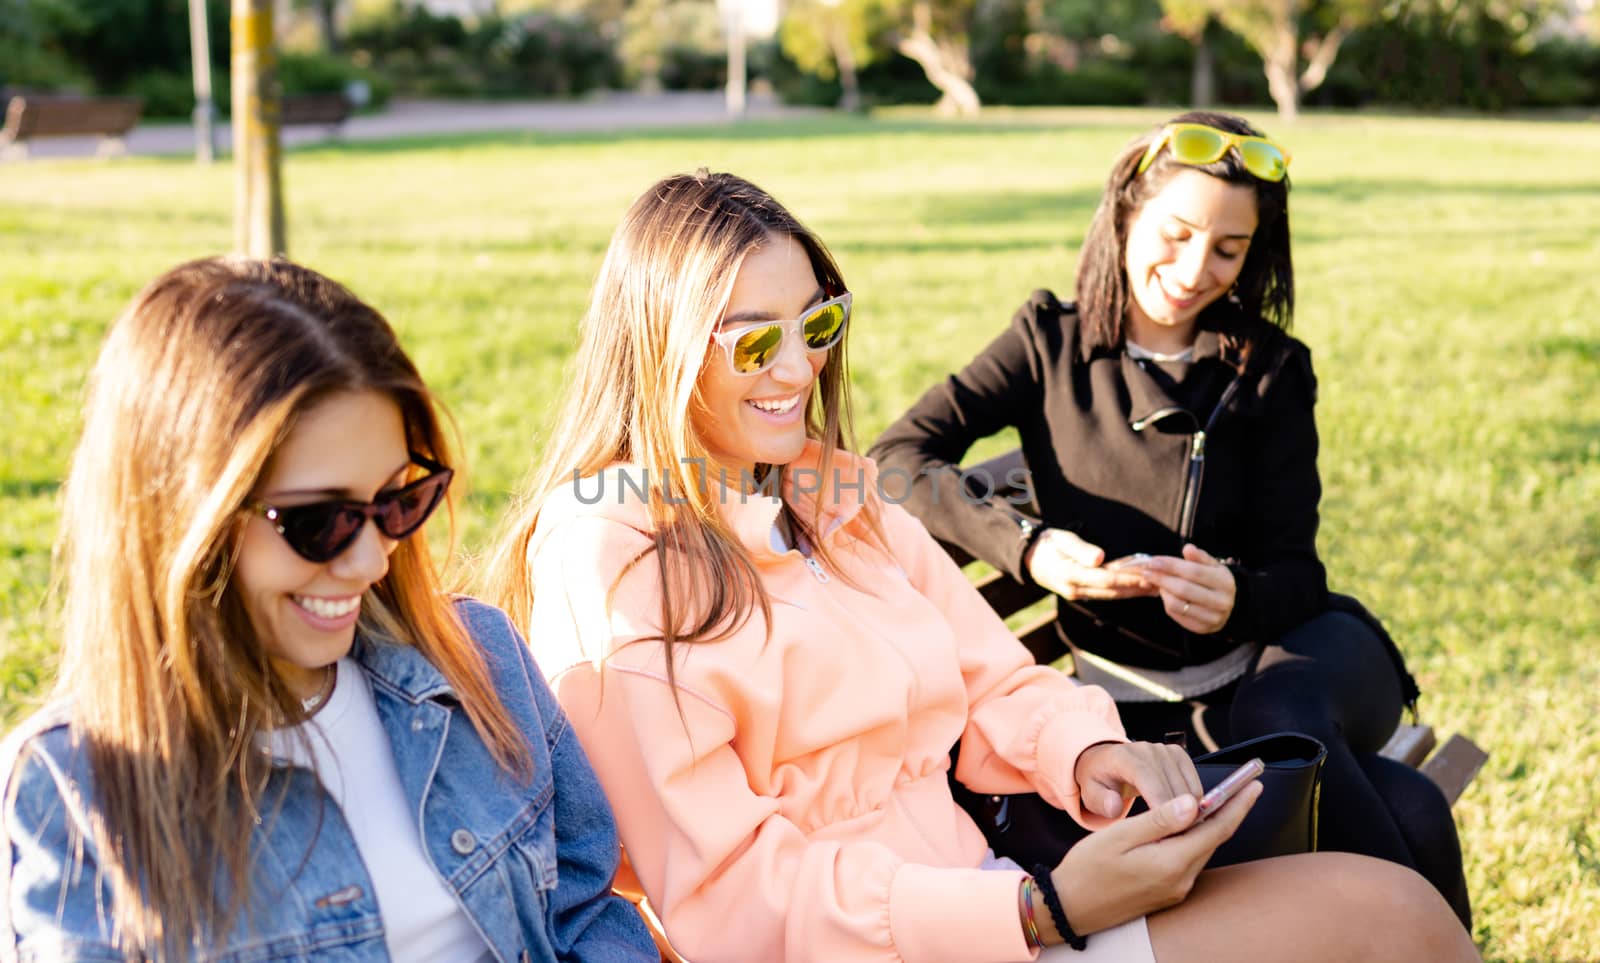 Modern young women sitting on a bench in a green parque using smartphone to stay connected with social network - Female friends are shopping online surrounded by nature in contrast with technology